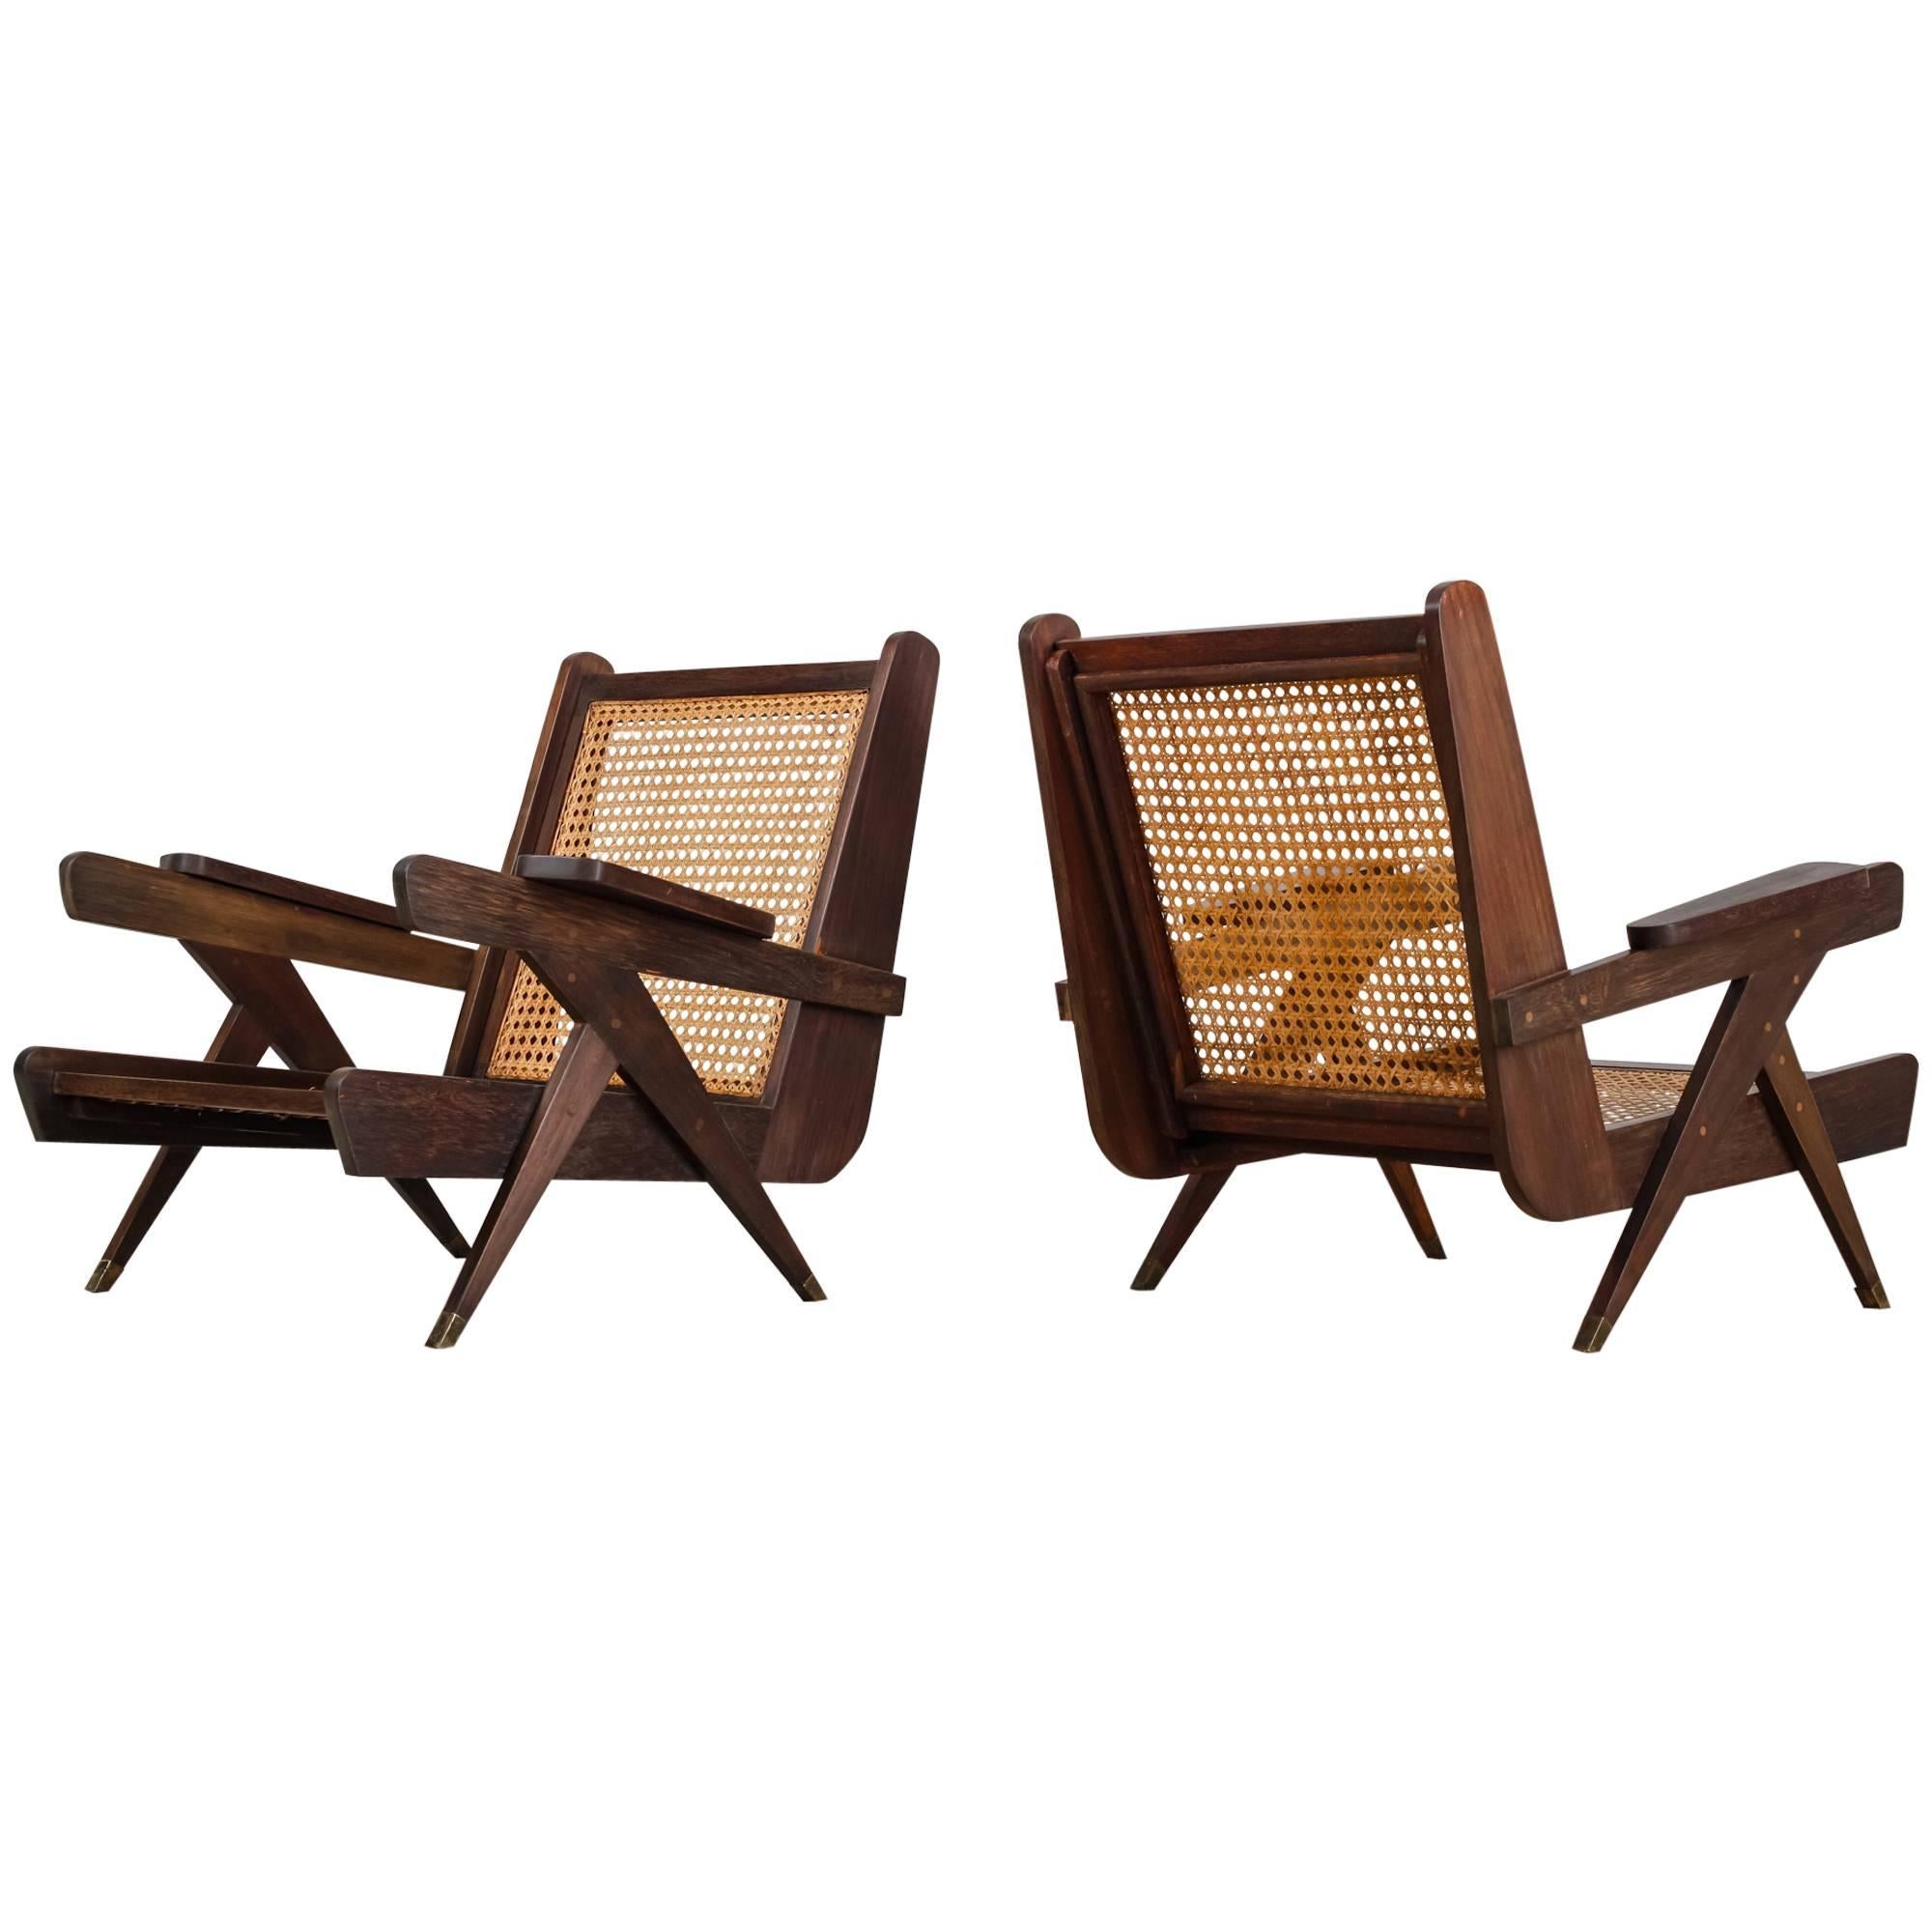 Pair of Modernist French Teak and Cane Chairs, Congo, Unité d’Habitation, 1960s For Sale